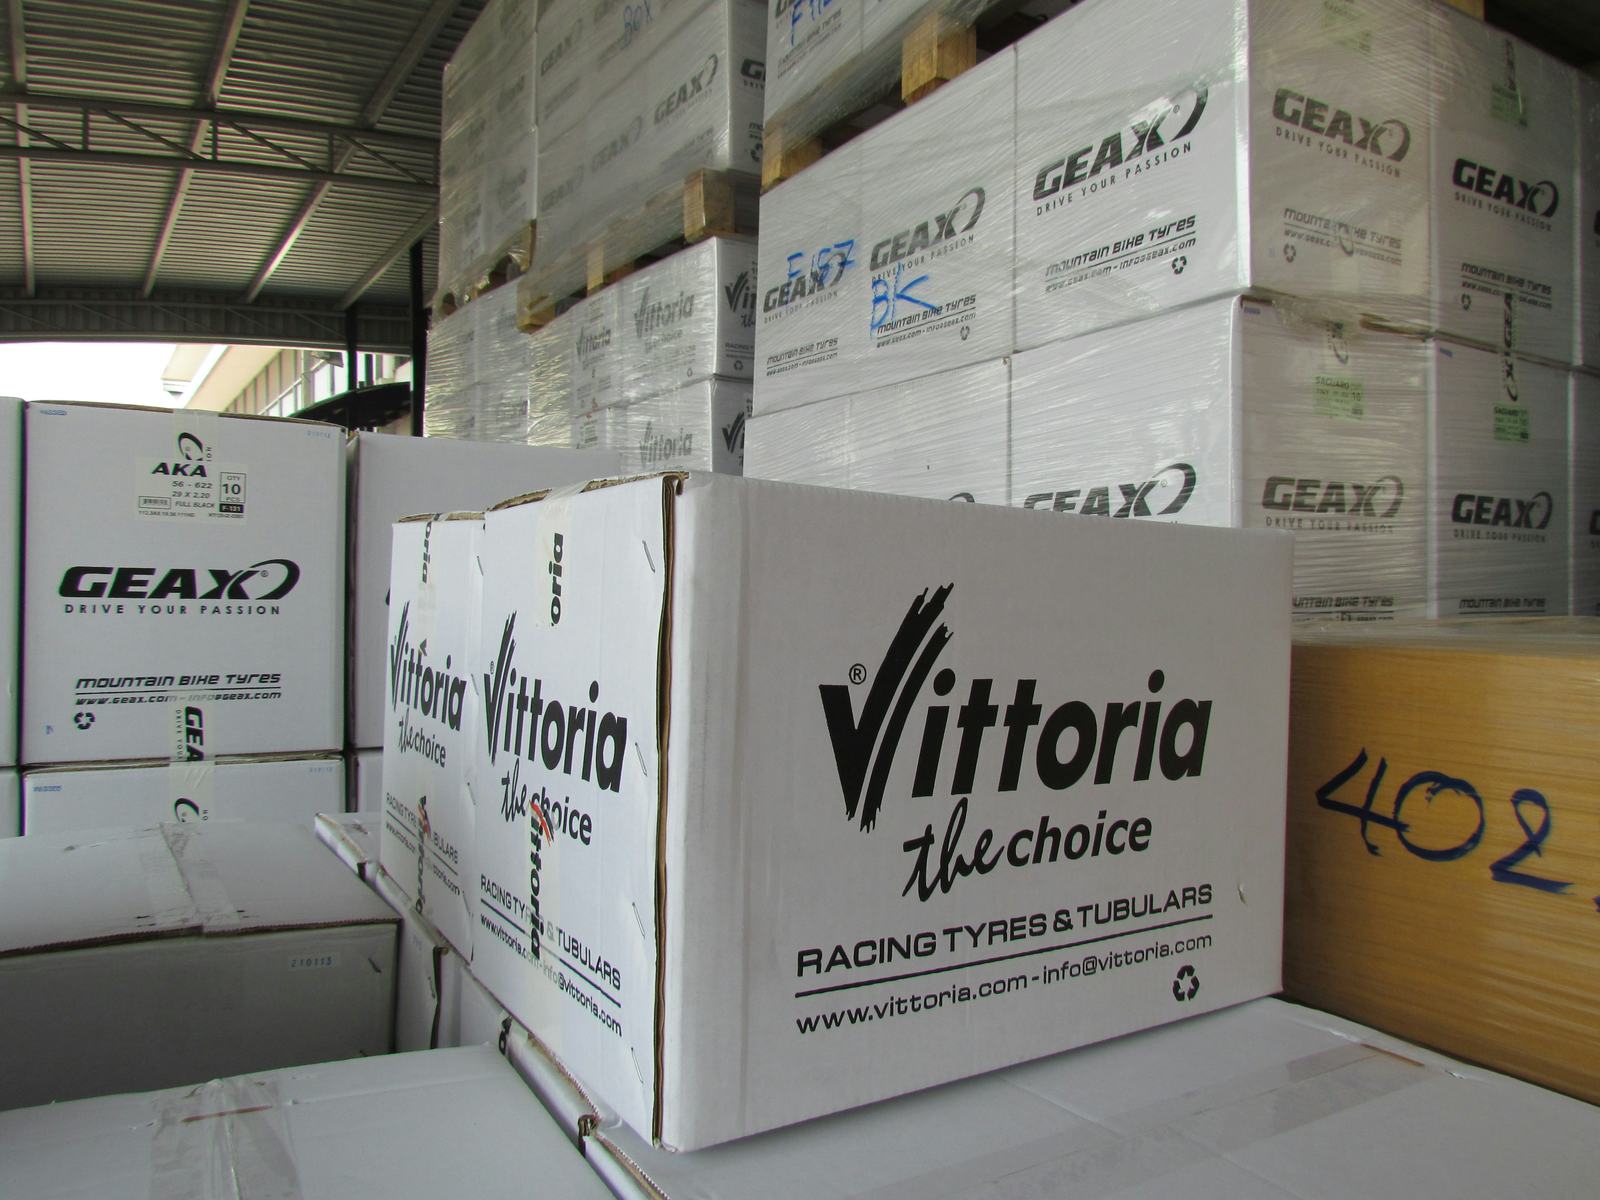 Vittoria, manufacturer of premium bicycle tyres including tubes, will say goodbye to the brand name GEAX. – Photo Bike Europe

